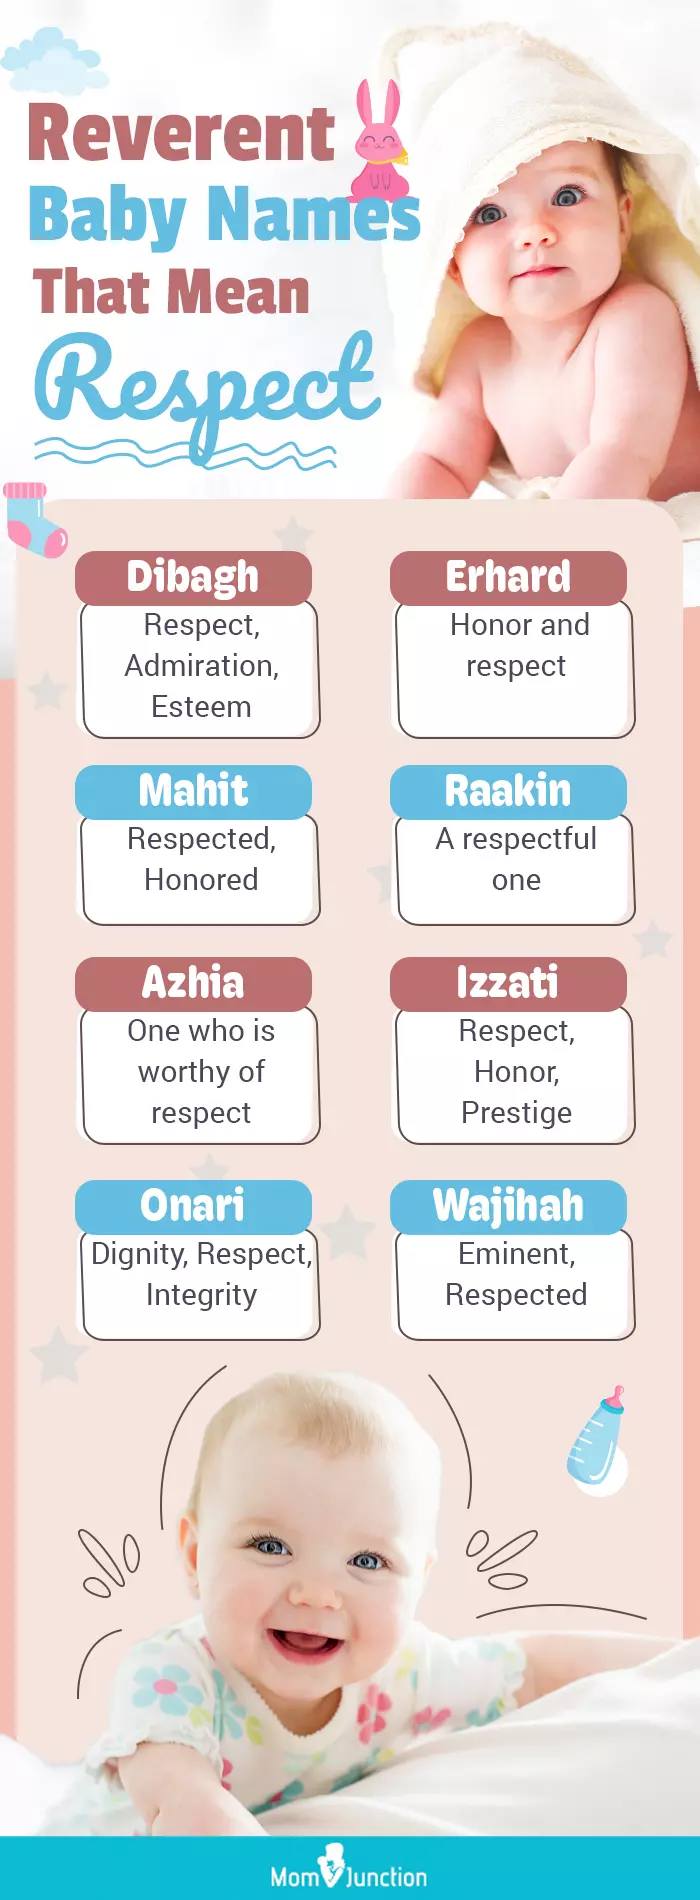 reverent baby names that mean respect (infographic)